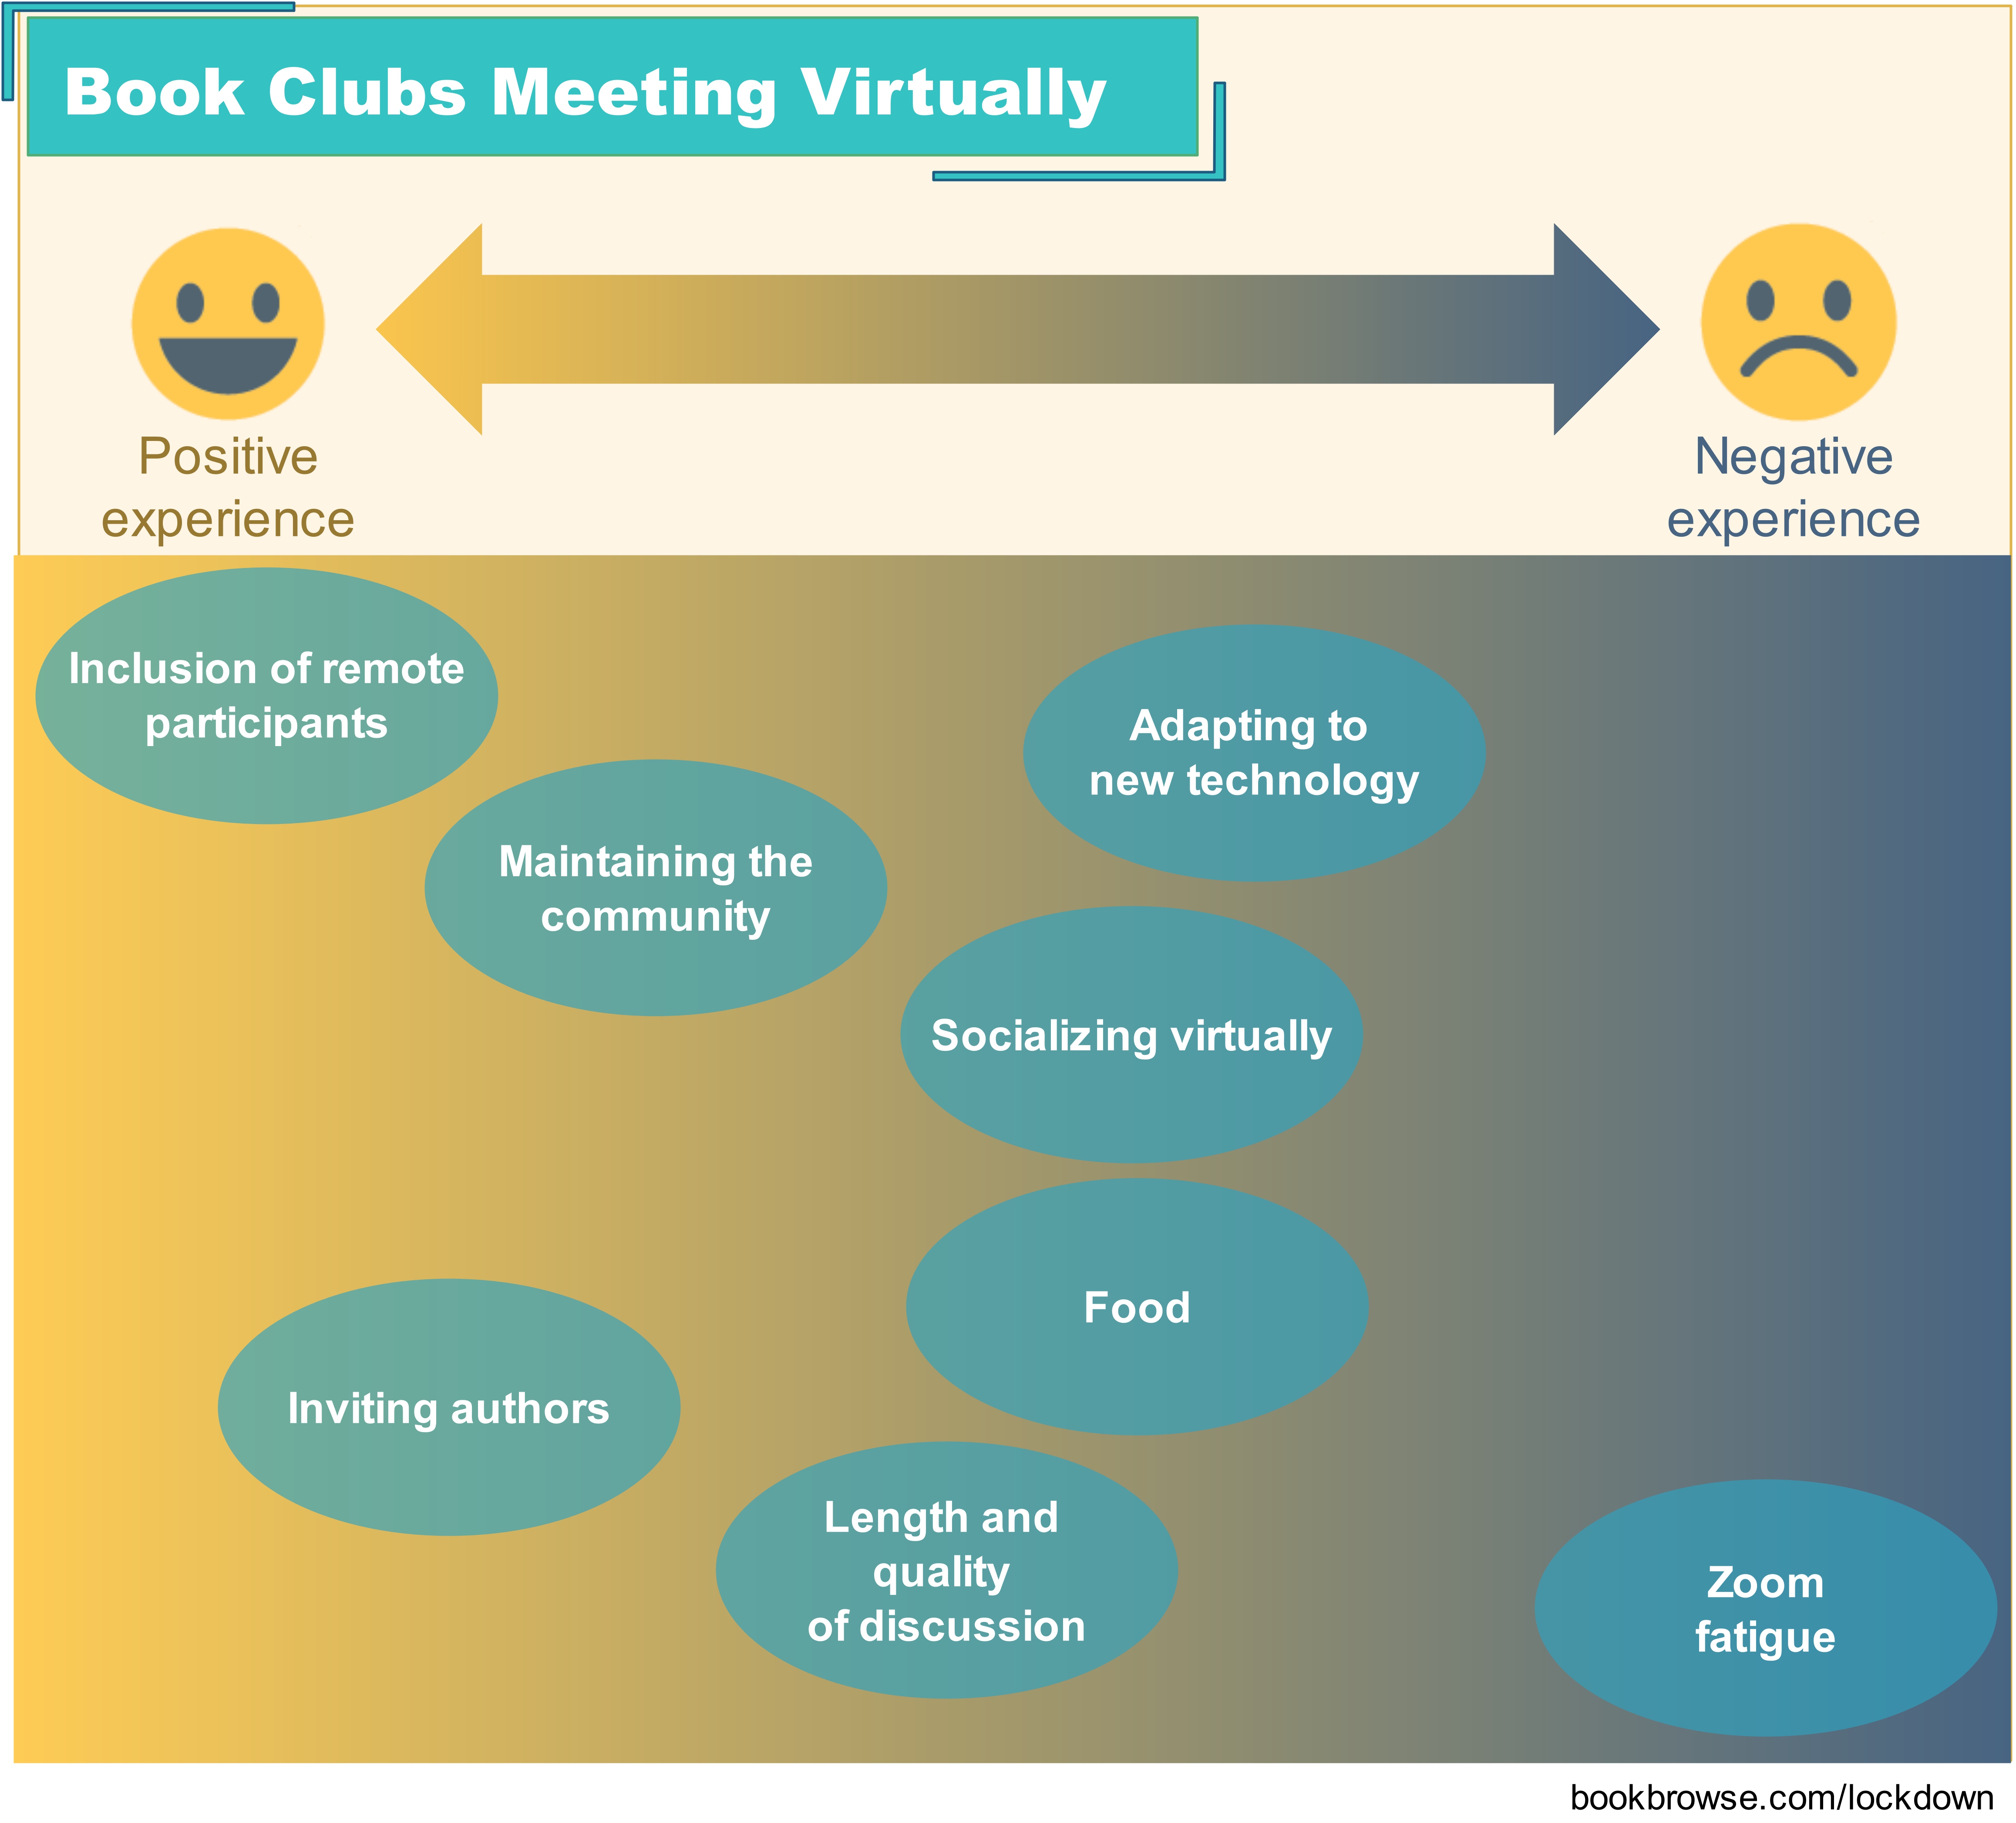 Book Clubs Meeting Virtually - Pros and Cons